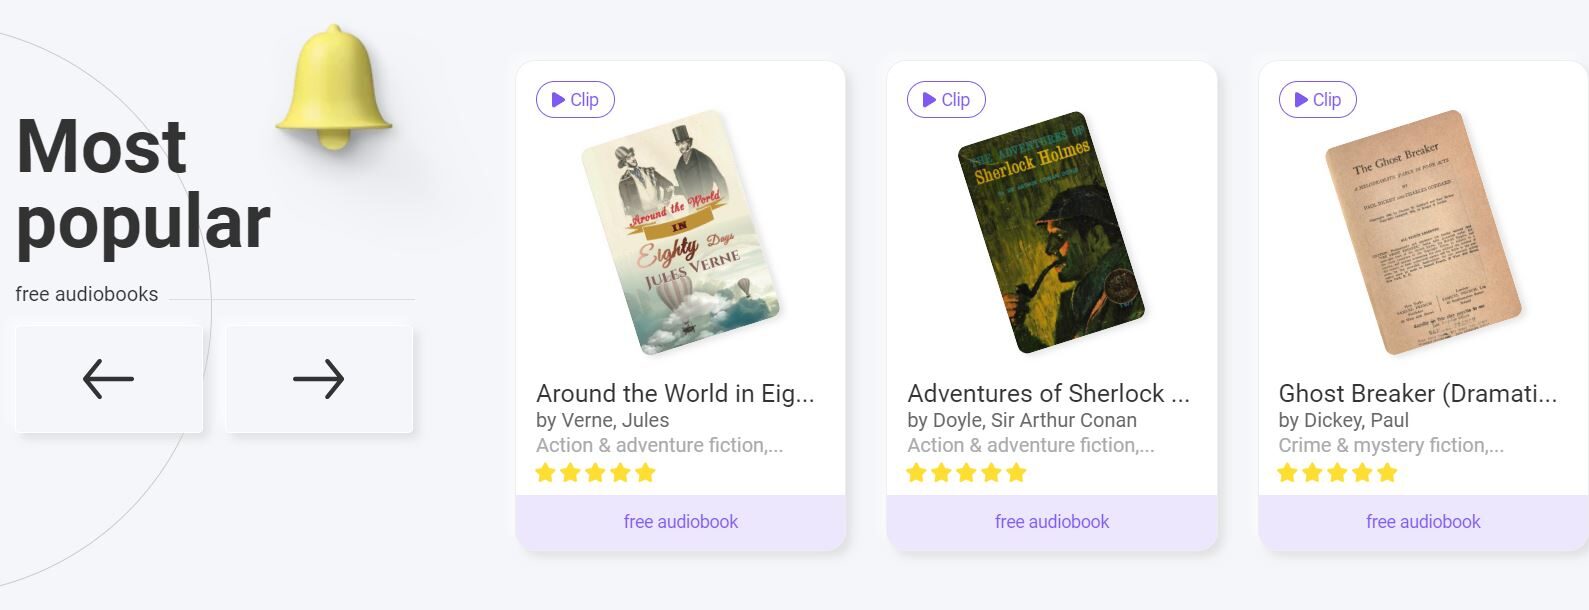 A webpage section titled "Most Popular" showcasing free audio books UK: "Around the World in Eighty Days," "Adventures of Sherlock Holmes," and "Ghost Breaker." Each book displays a cover image and star ratings, offering a perfect glimpse into what makes our platform the best audiobook app.